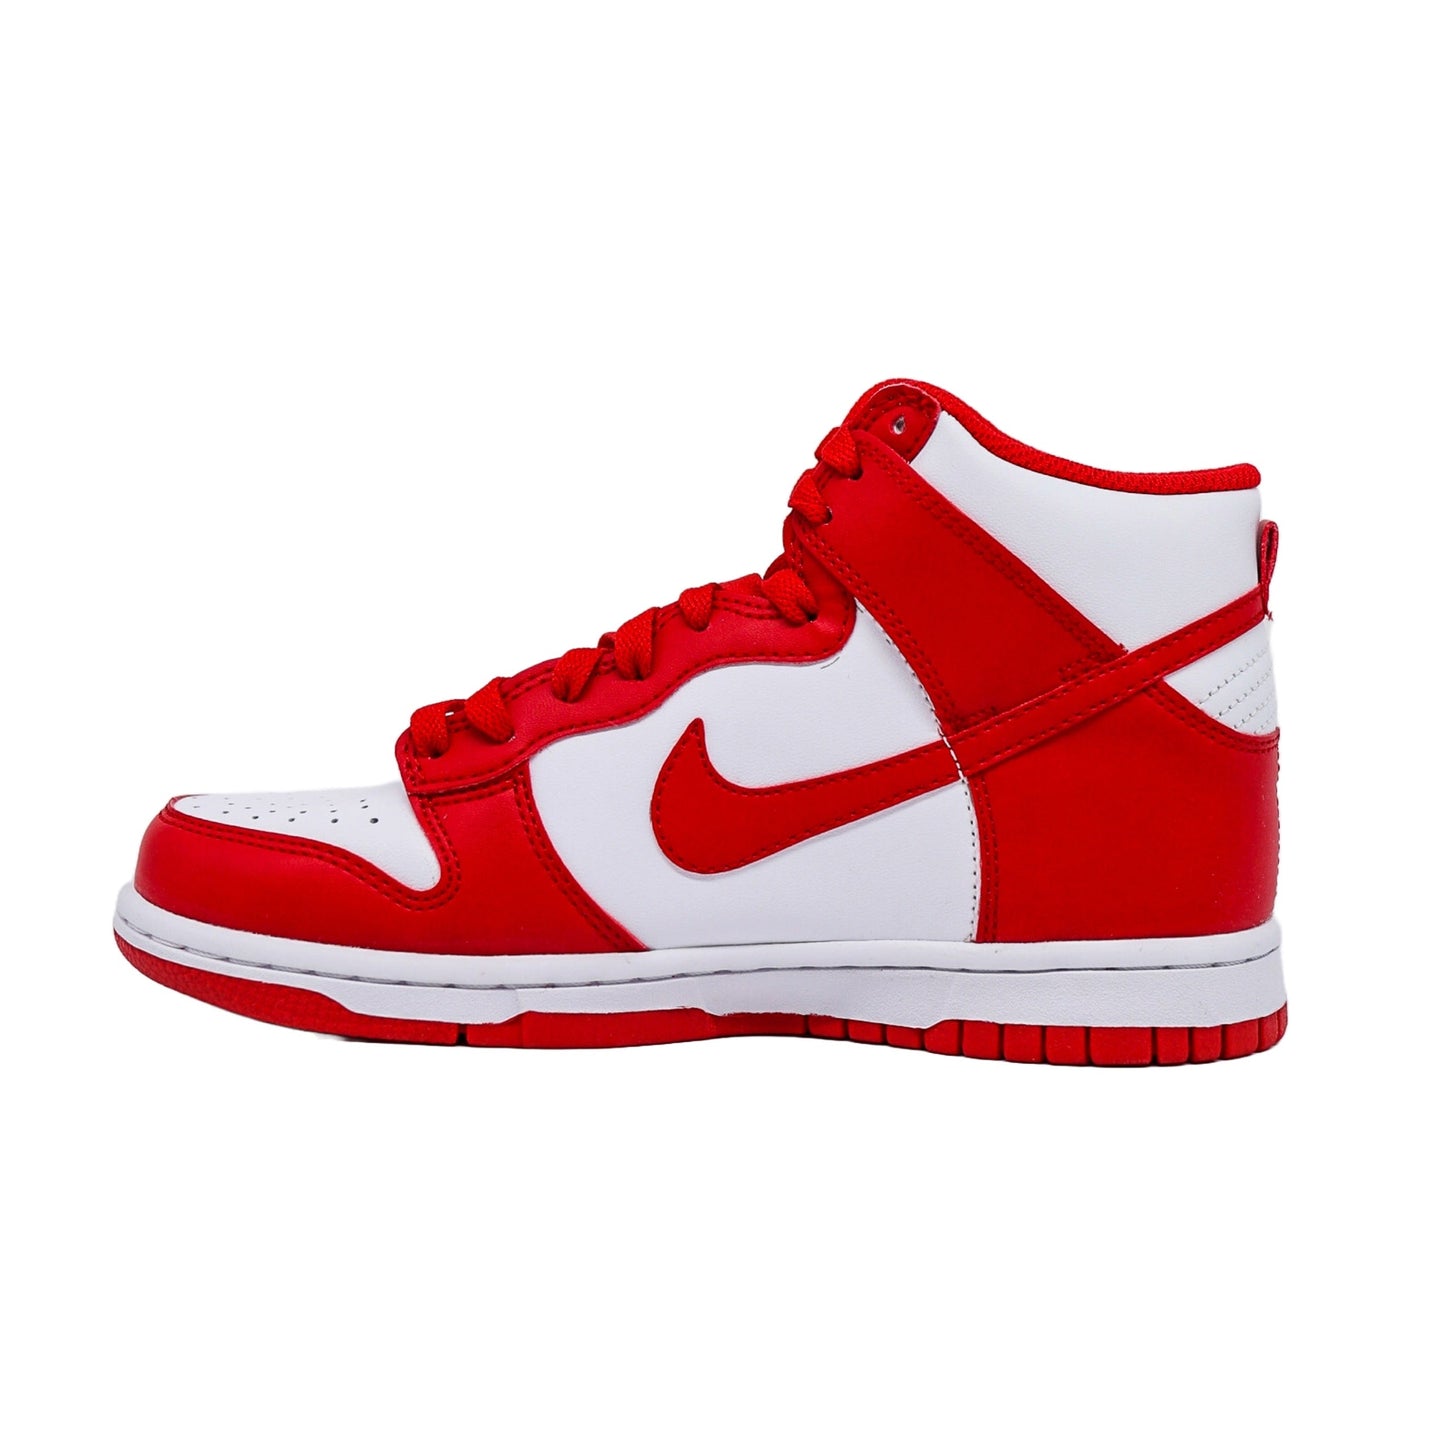 Nike Dunk High (GS), Championship Red